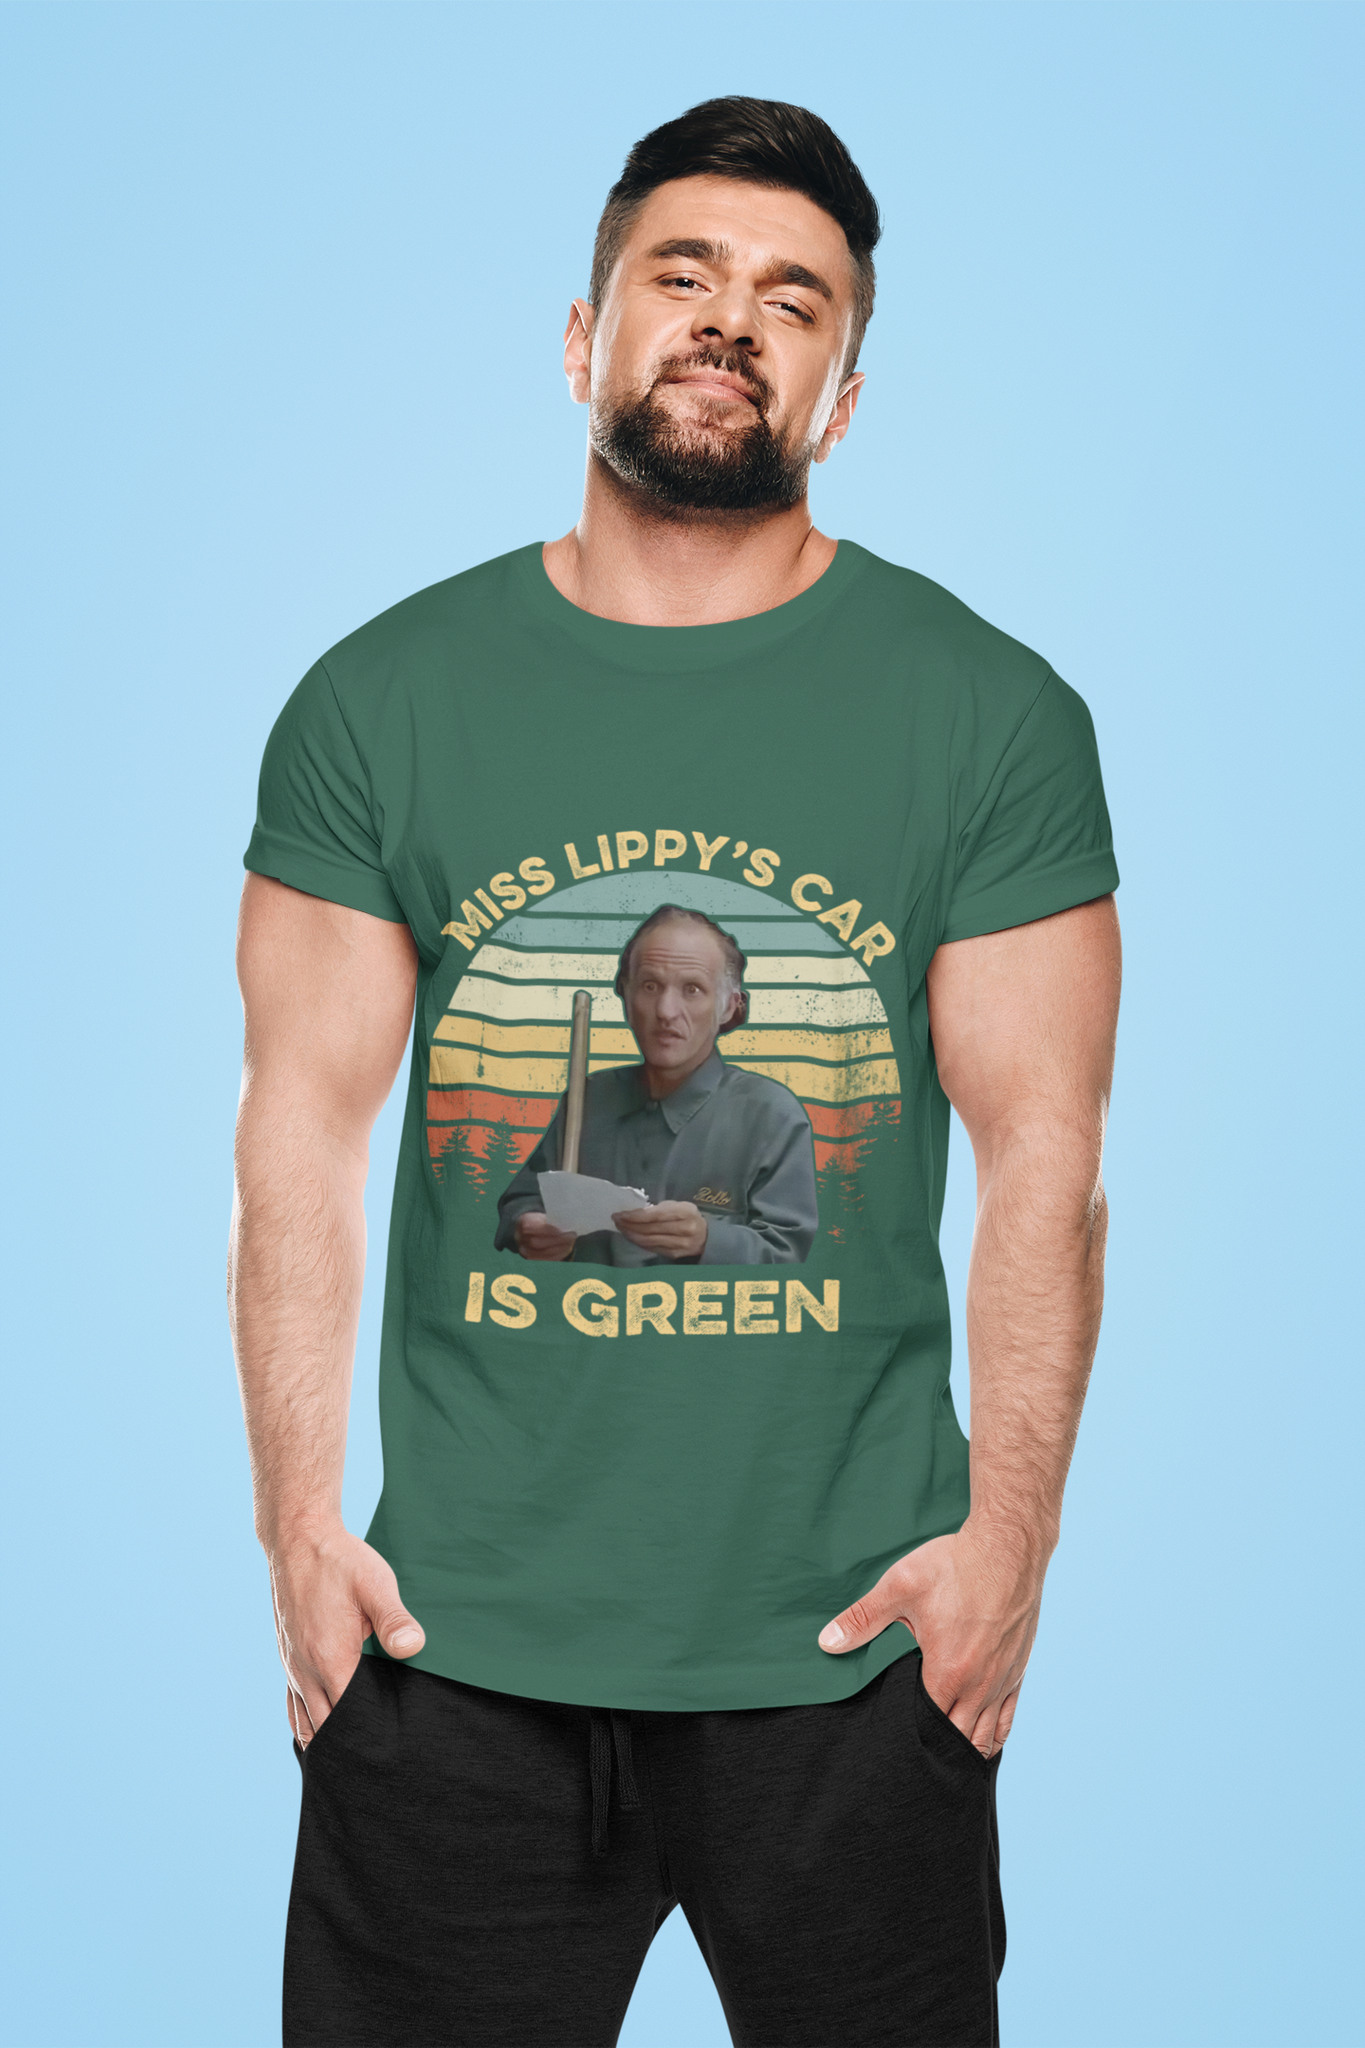 Billy Madison Vintage T Shirt, Miss Lippys Car Is Green Tshirt, Rollo The Janitor T Shirt